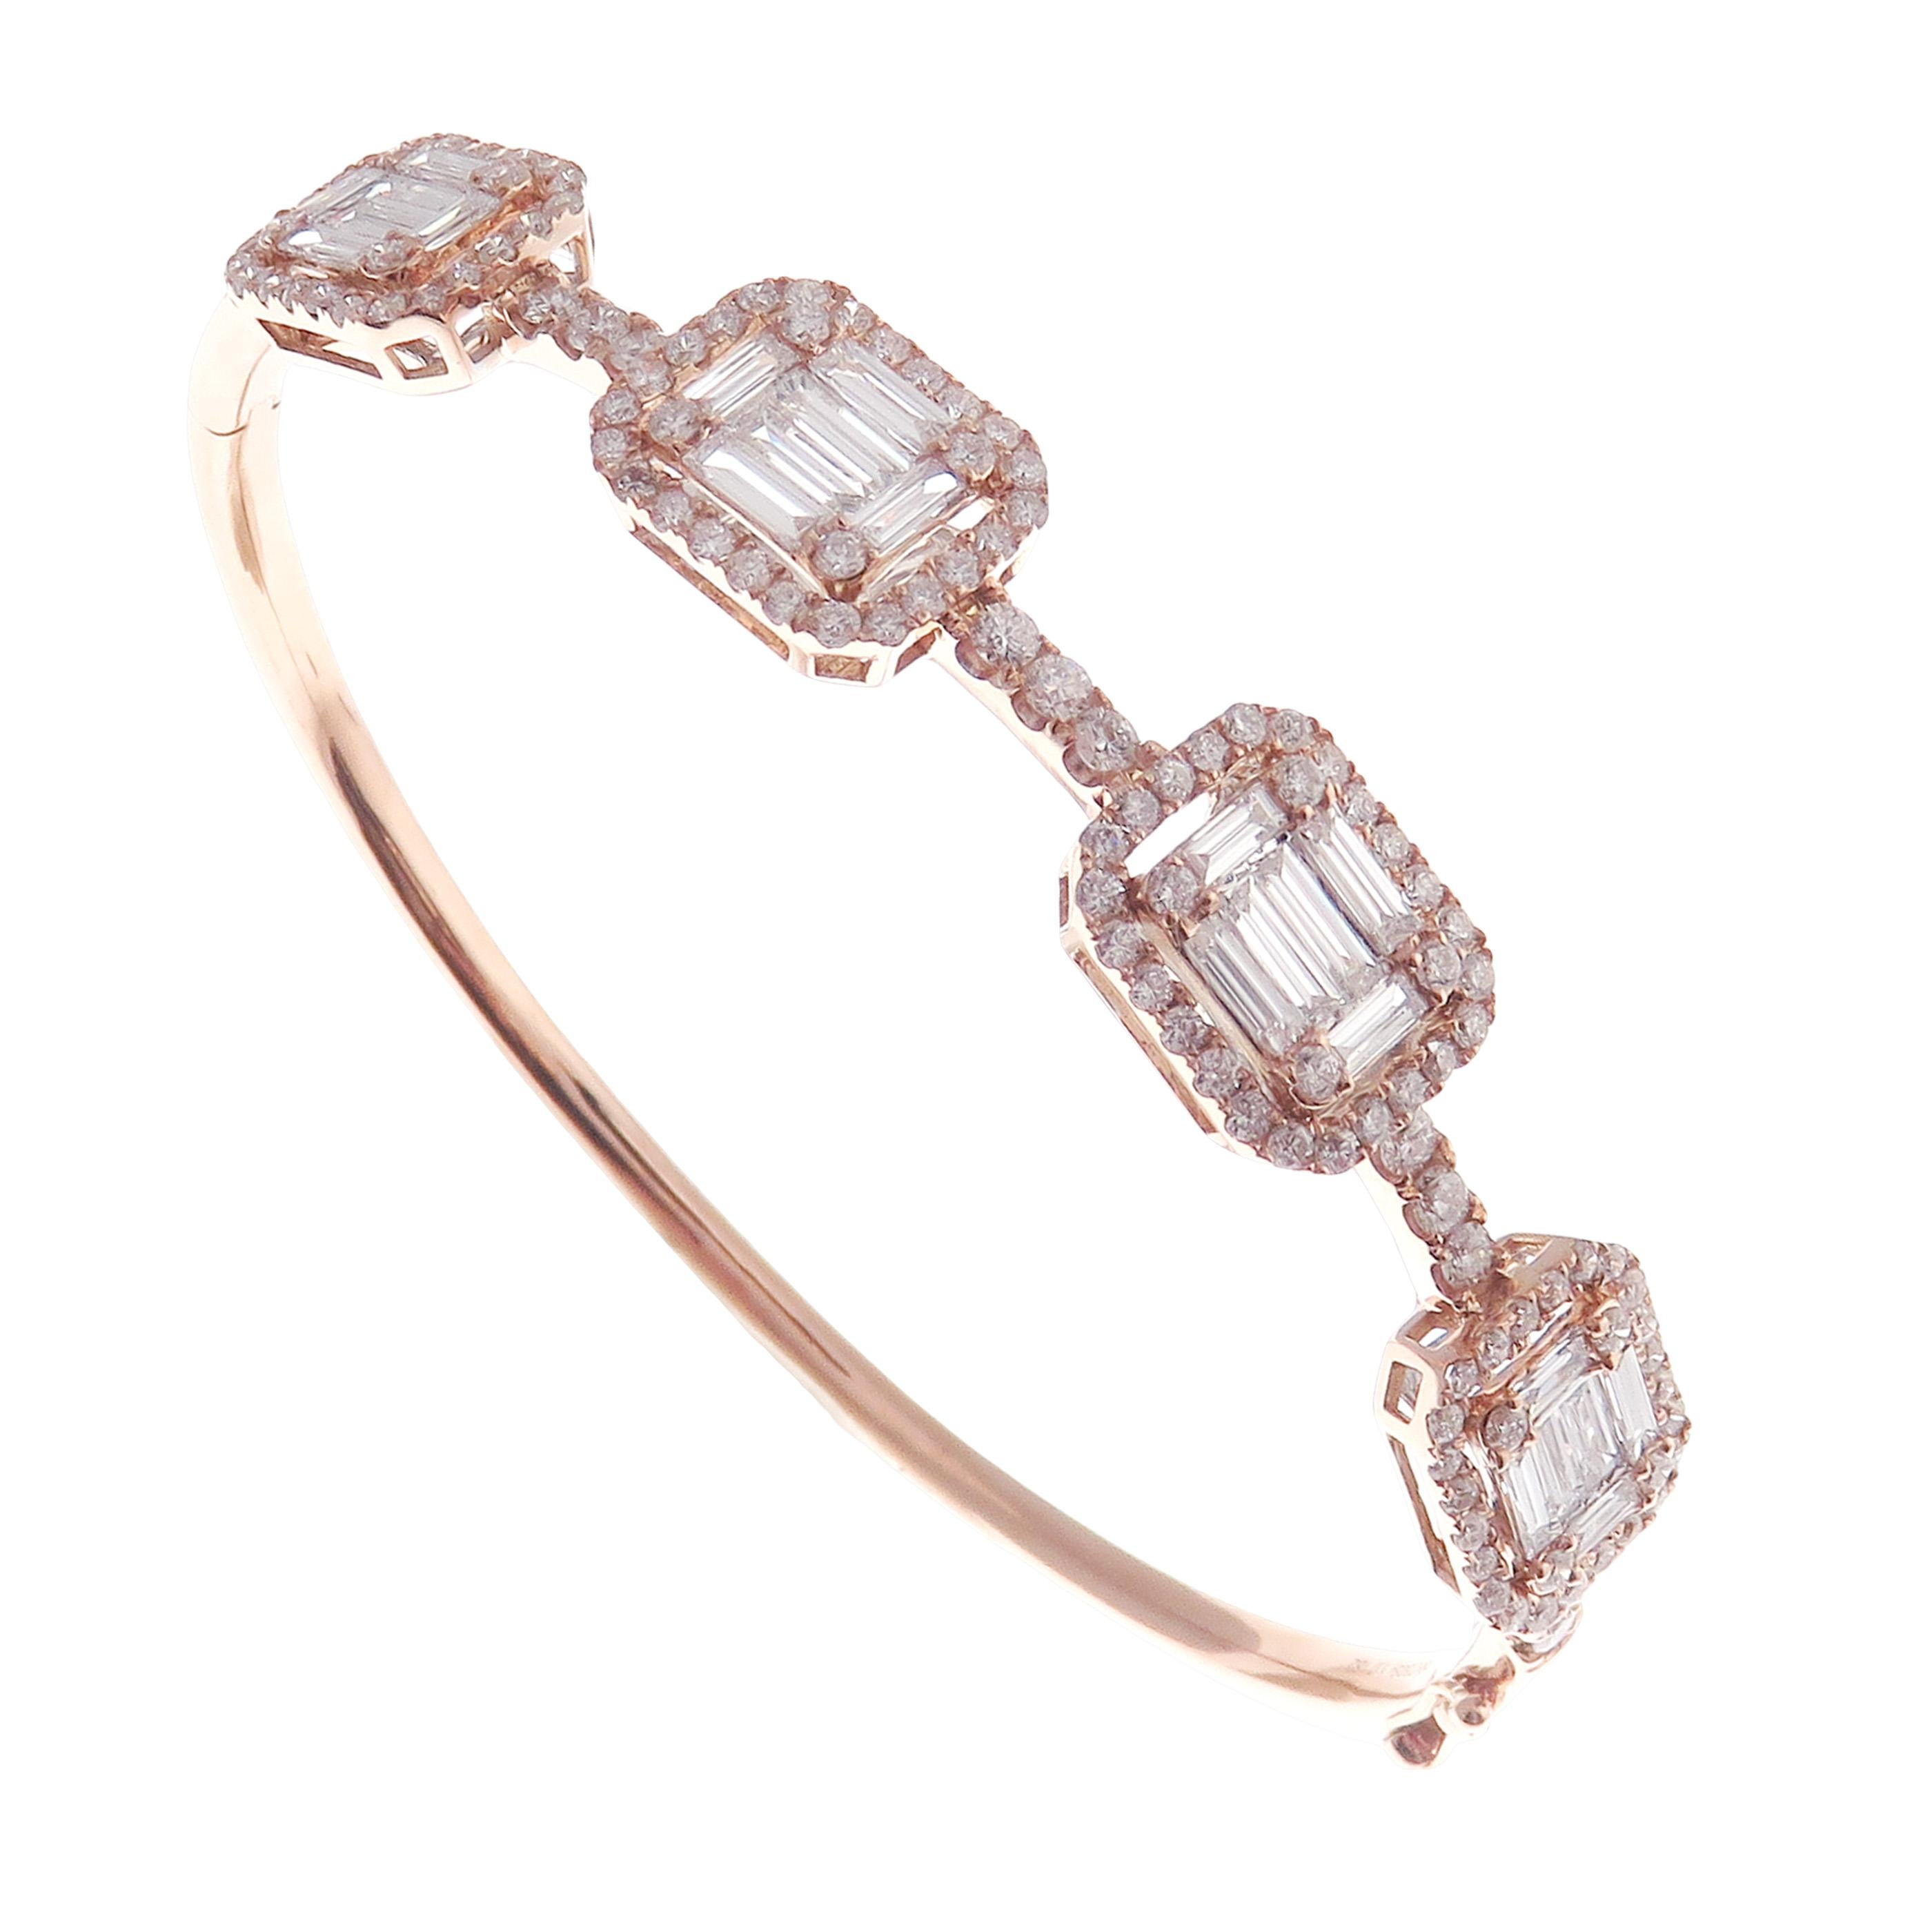 This delicate baguette squares bangle is crafted in 18-karat rose gold, weighing approximately 2.79 total carats of V-Quality white diamond. 

Fits wrists up to 6.25